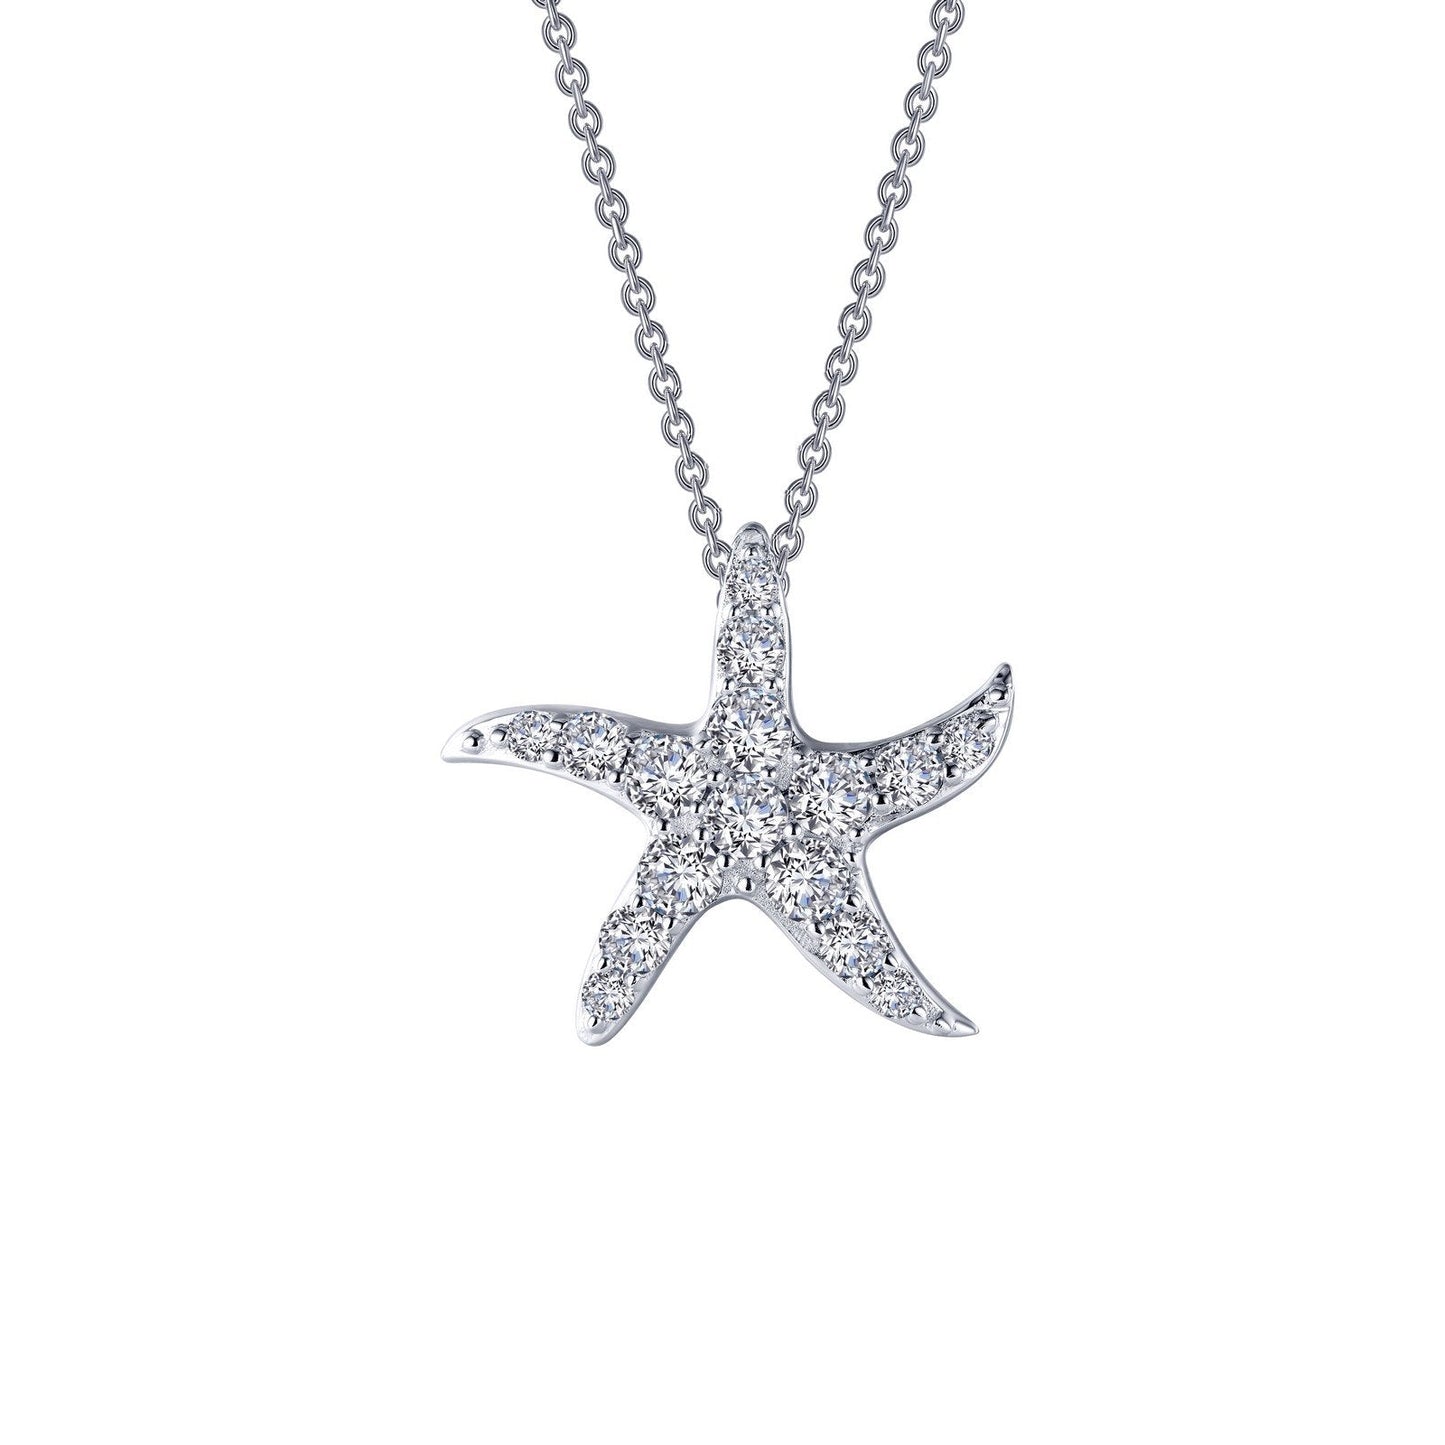 Lafonn Whimsical Starfish Necklace Simulated Diamond NECKLACES Platinum 1.01 CTS Approx. 18.5mm (H) x 20mm (W)